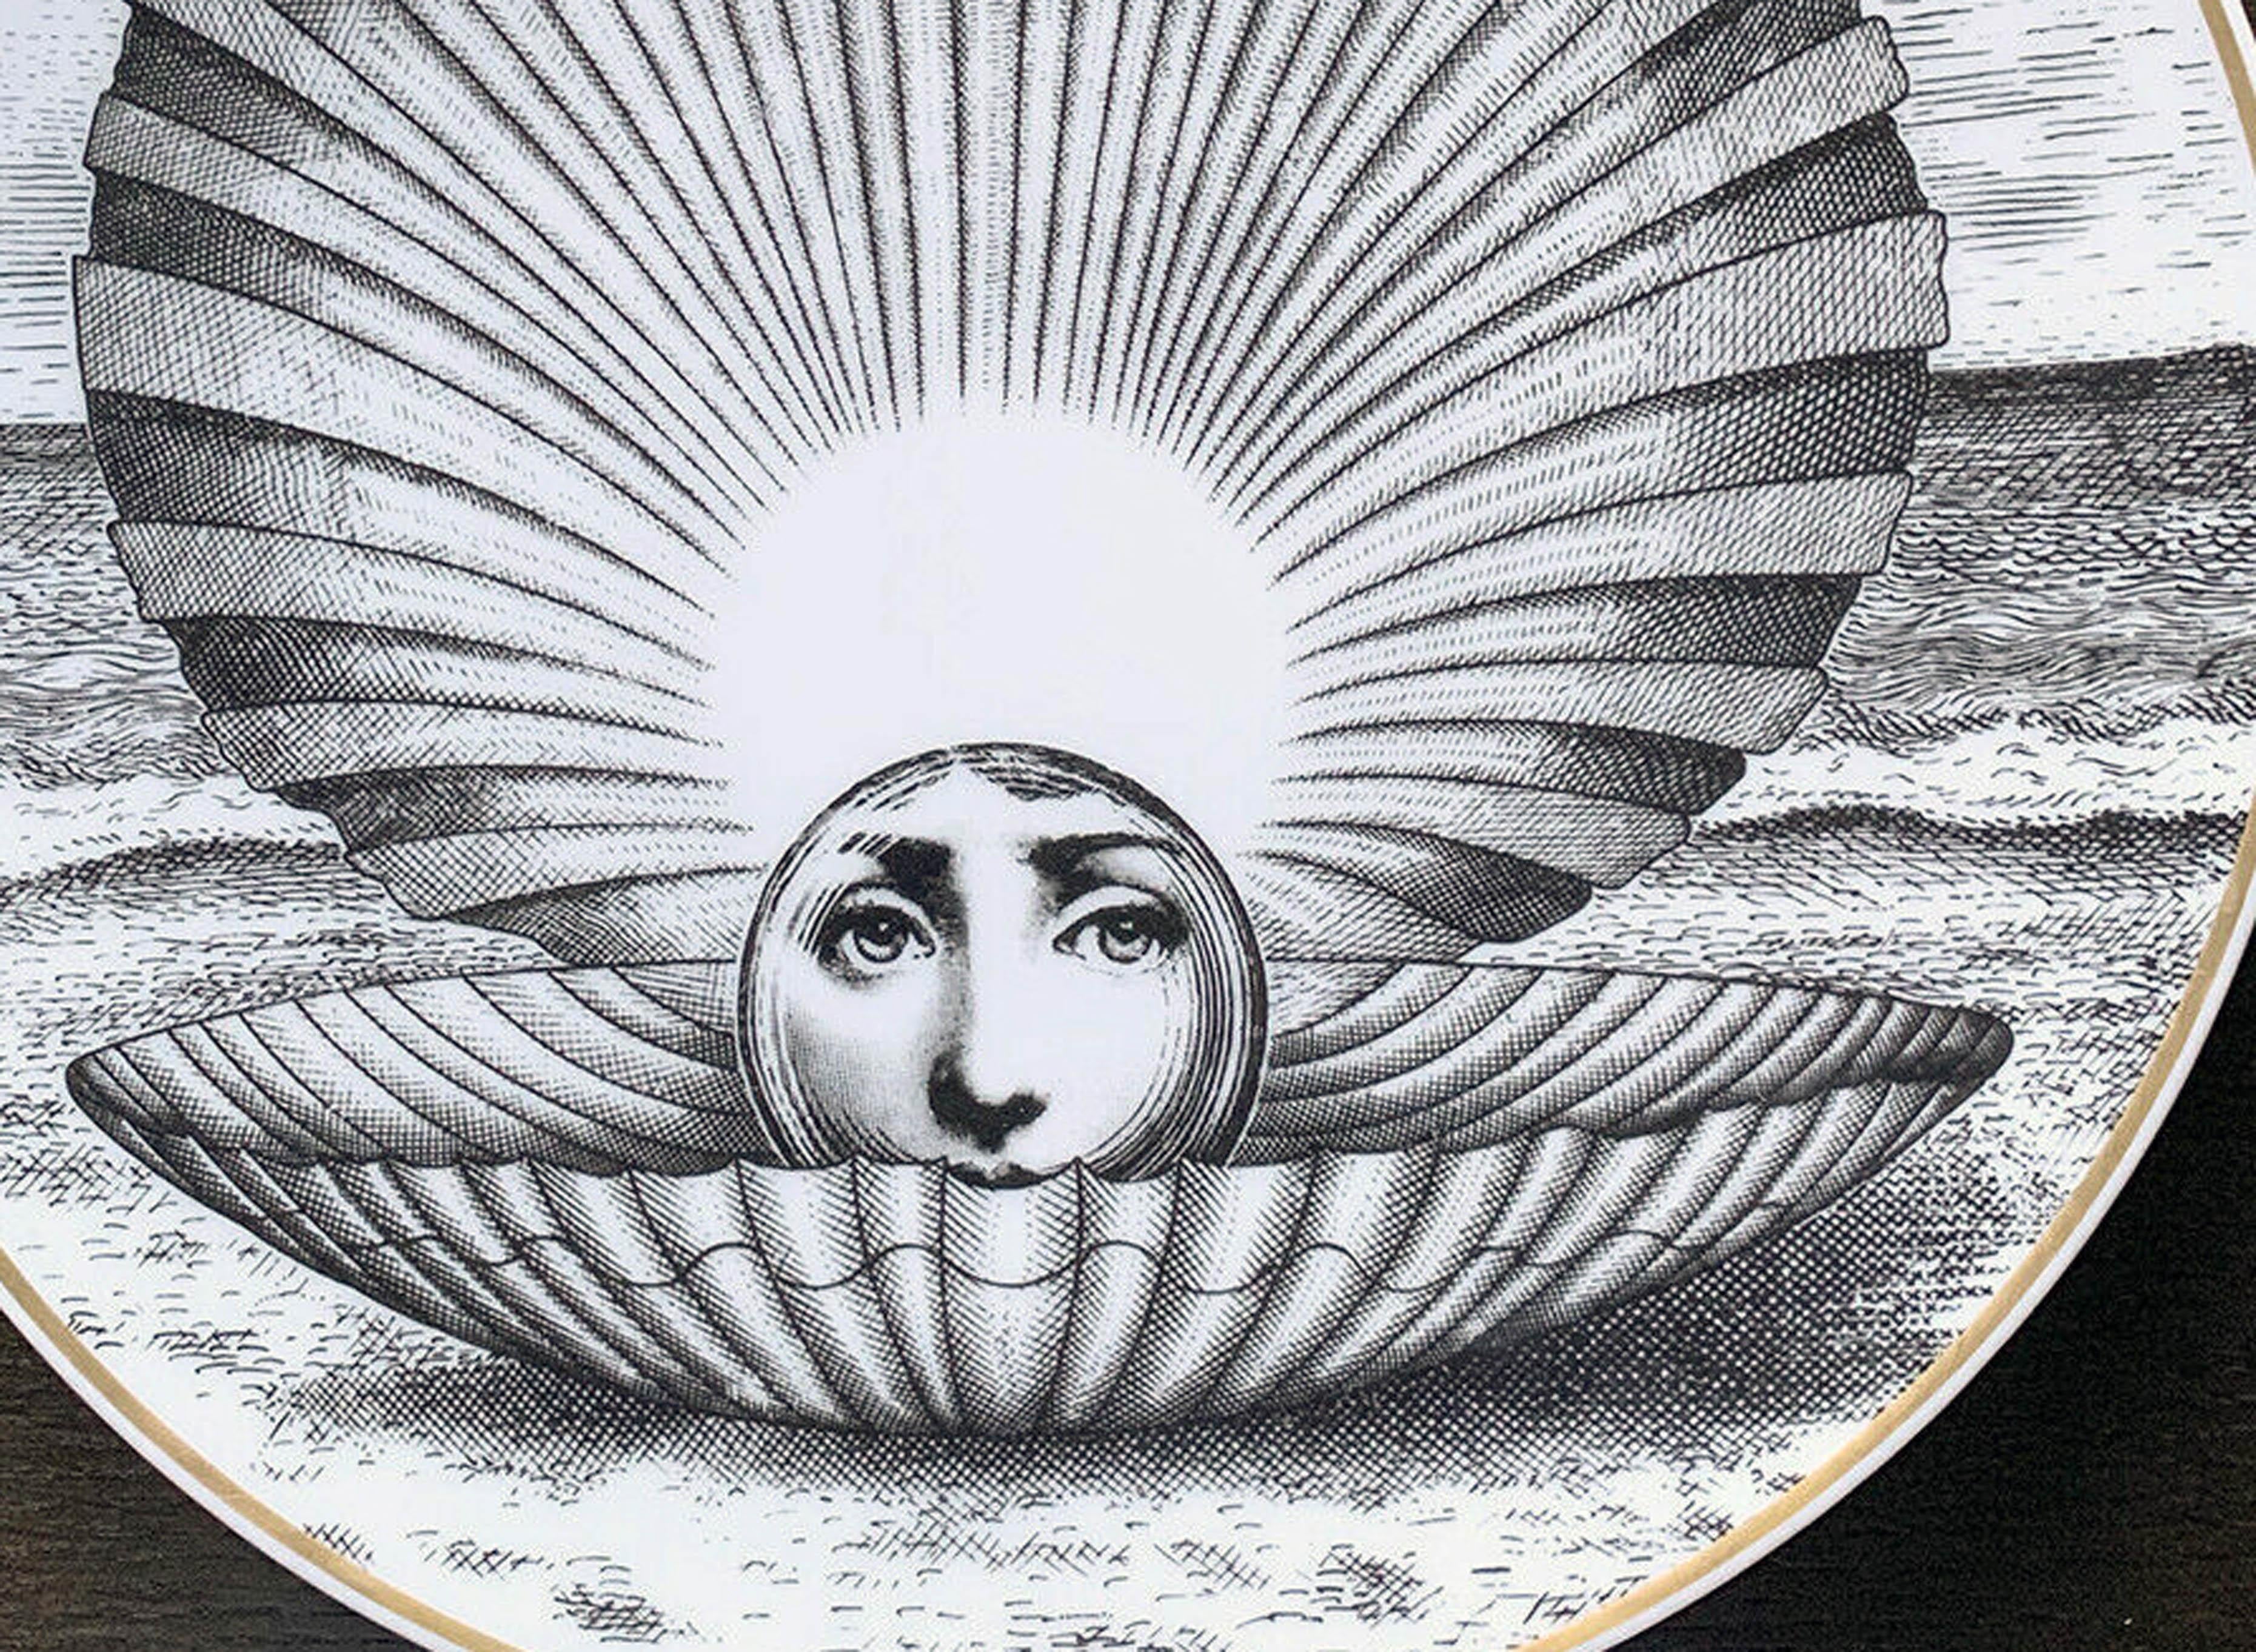 Piero Fornasetti Rosenthal plate, Motiv 14
1980s


Diameter: 9 1/4 inches

During the 1980s Rosenthal helped Revive Fornasetti's reputation by applying some of his most enduring illustrations on their products.

Reference:
Fornasetti tema